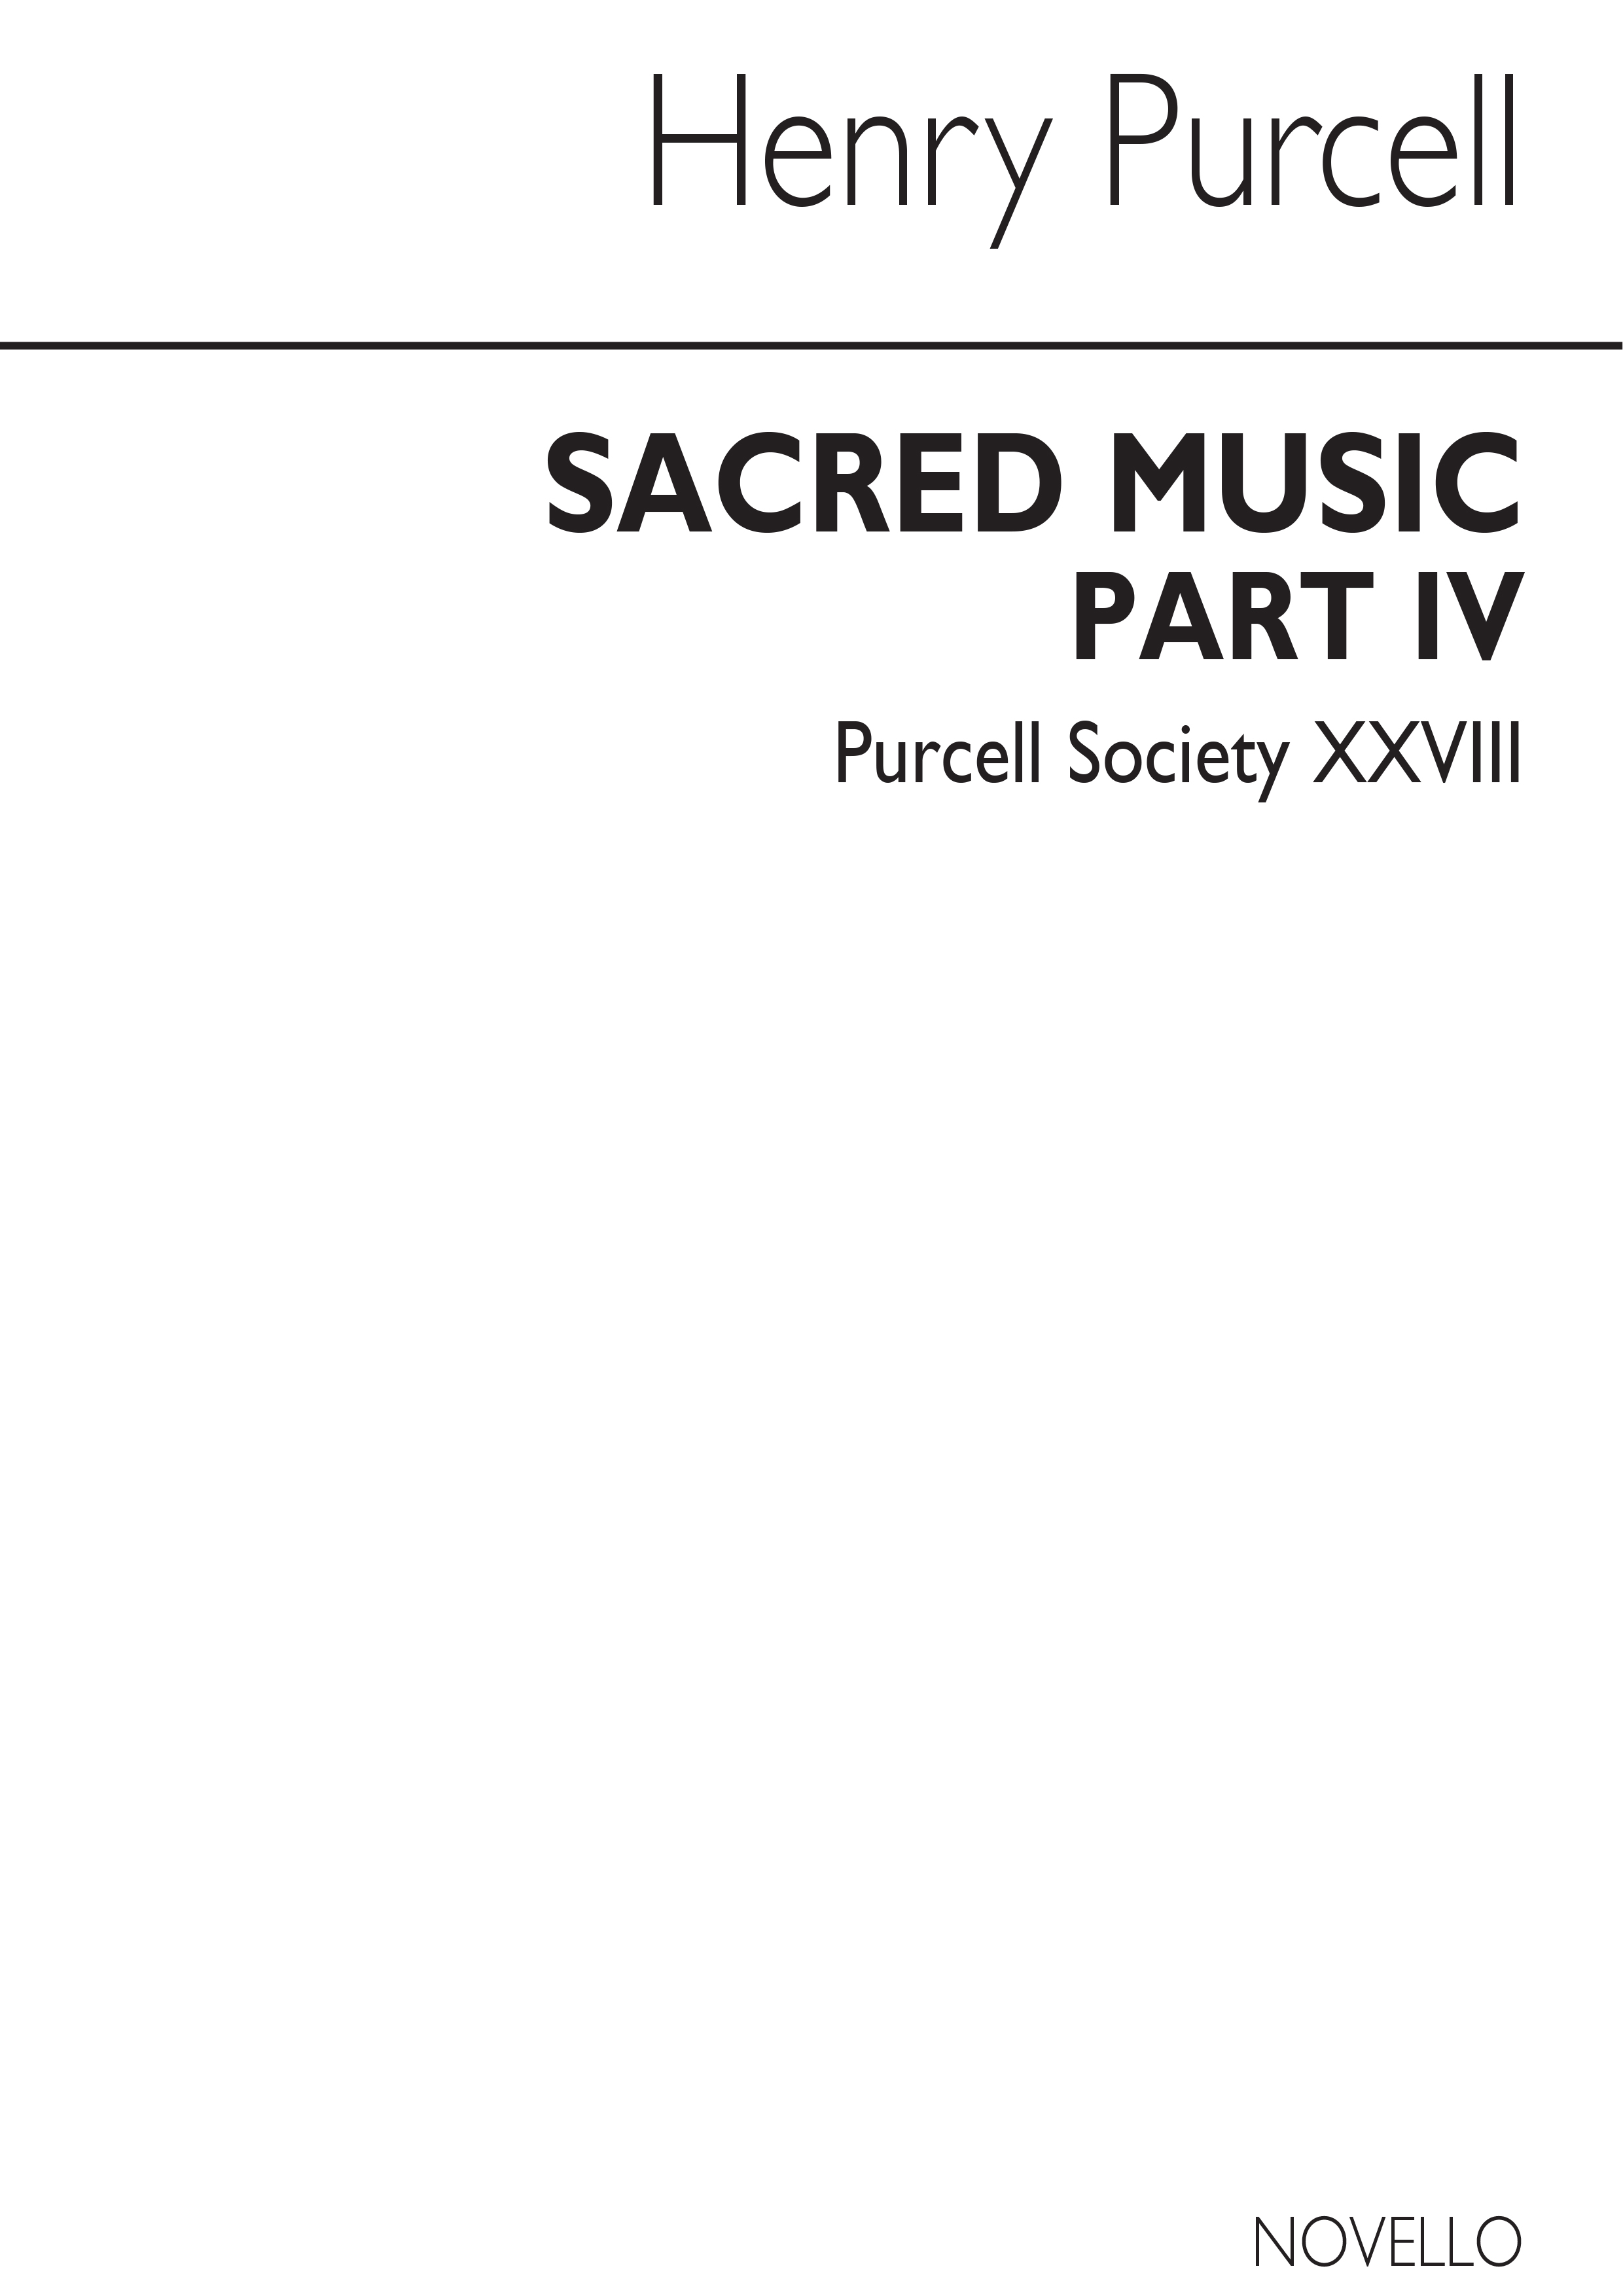 Purcell Society Volume 28 - Sacred Music Part 4 (Original Engraving)